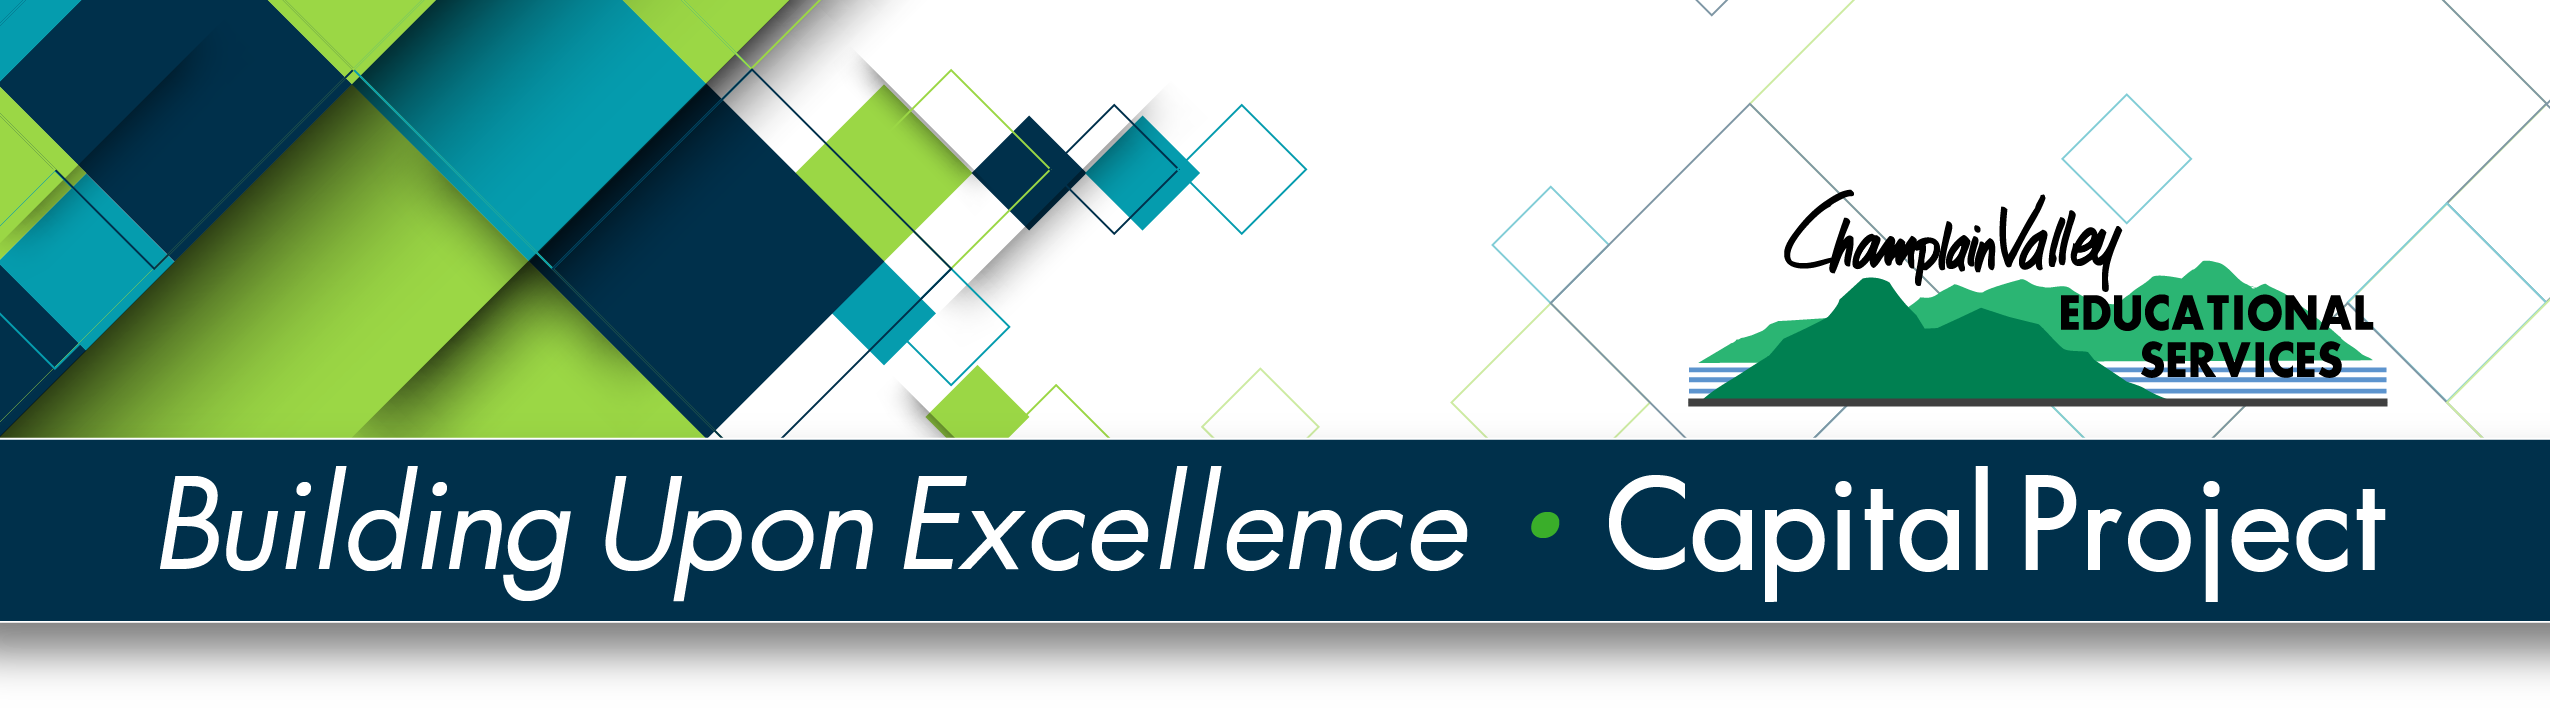 CVES Capital Project - Building Upon Excellence